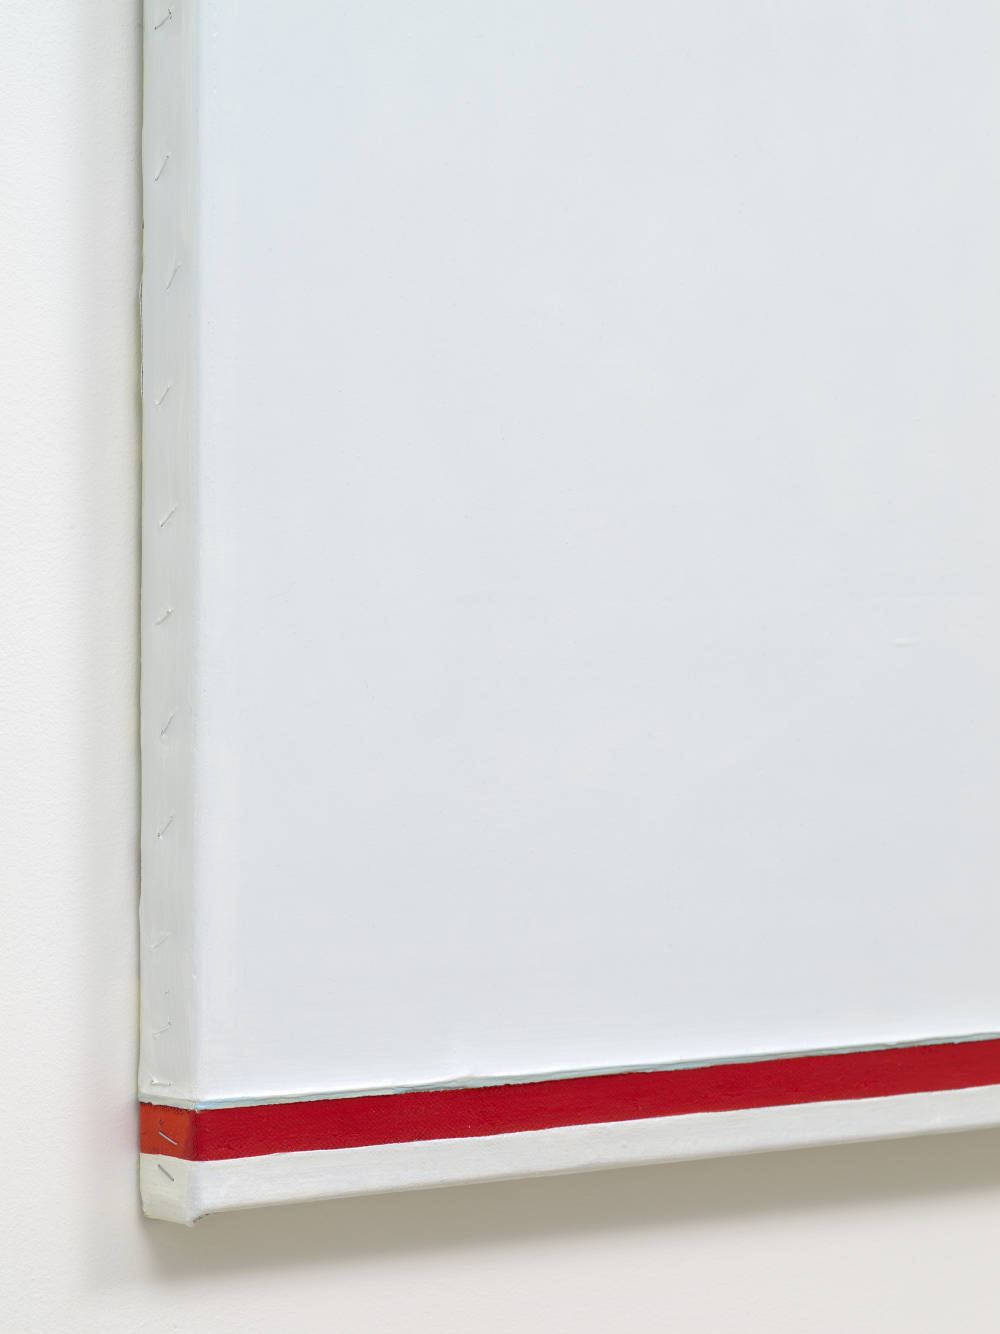 A detail of a white abstract painting. Along the side of the painting is a series of staples. At the bottom edge of the painting is a red bar of color which overlaps onto the side. 